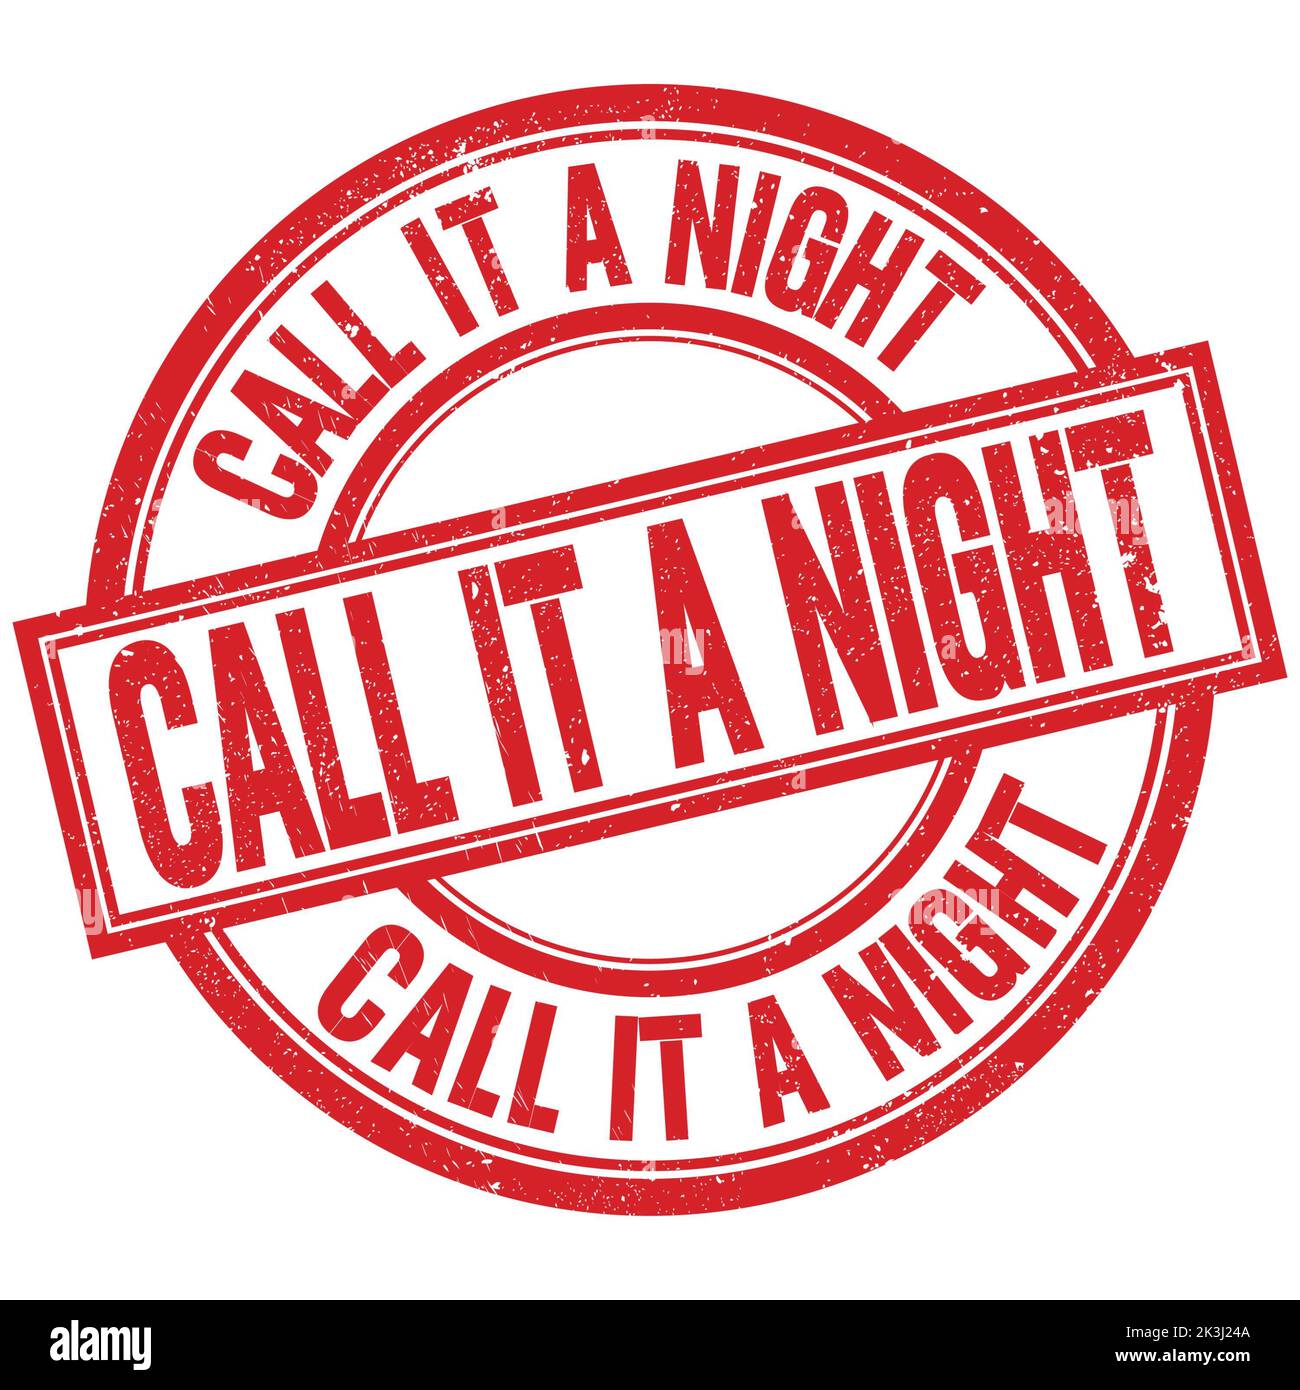 CALL IT A NIGHT text written word on red round stamp sign Stock Photo